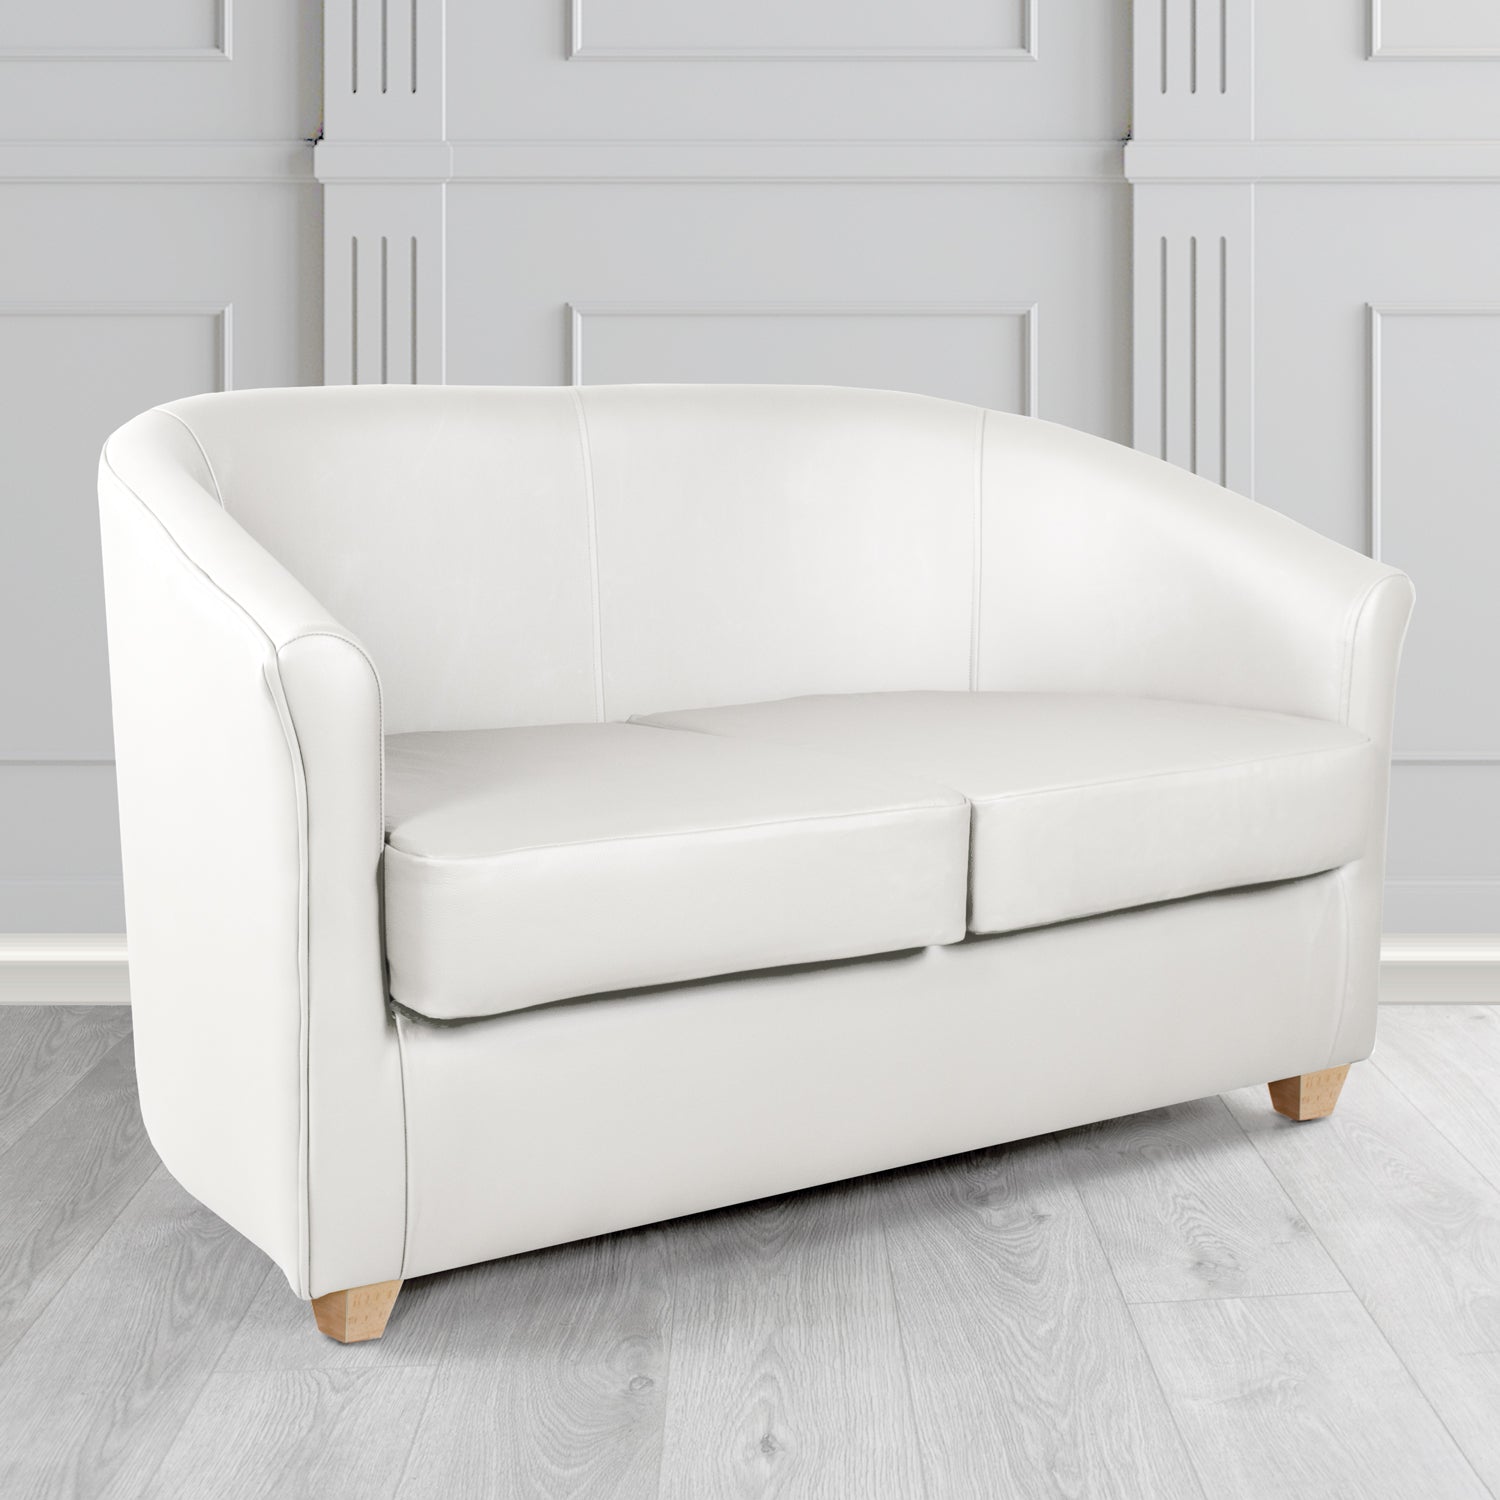 Cannes 2 Seater Tub Sofa in Madrid White Faux Leather - The Tub Chair Shop